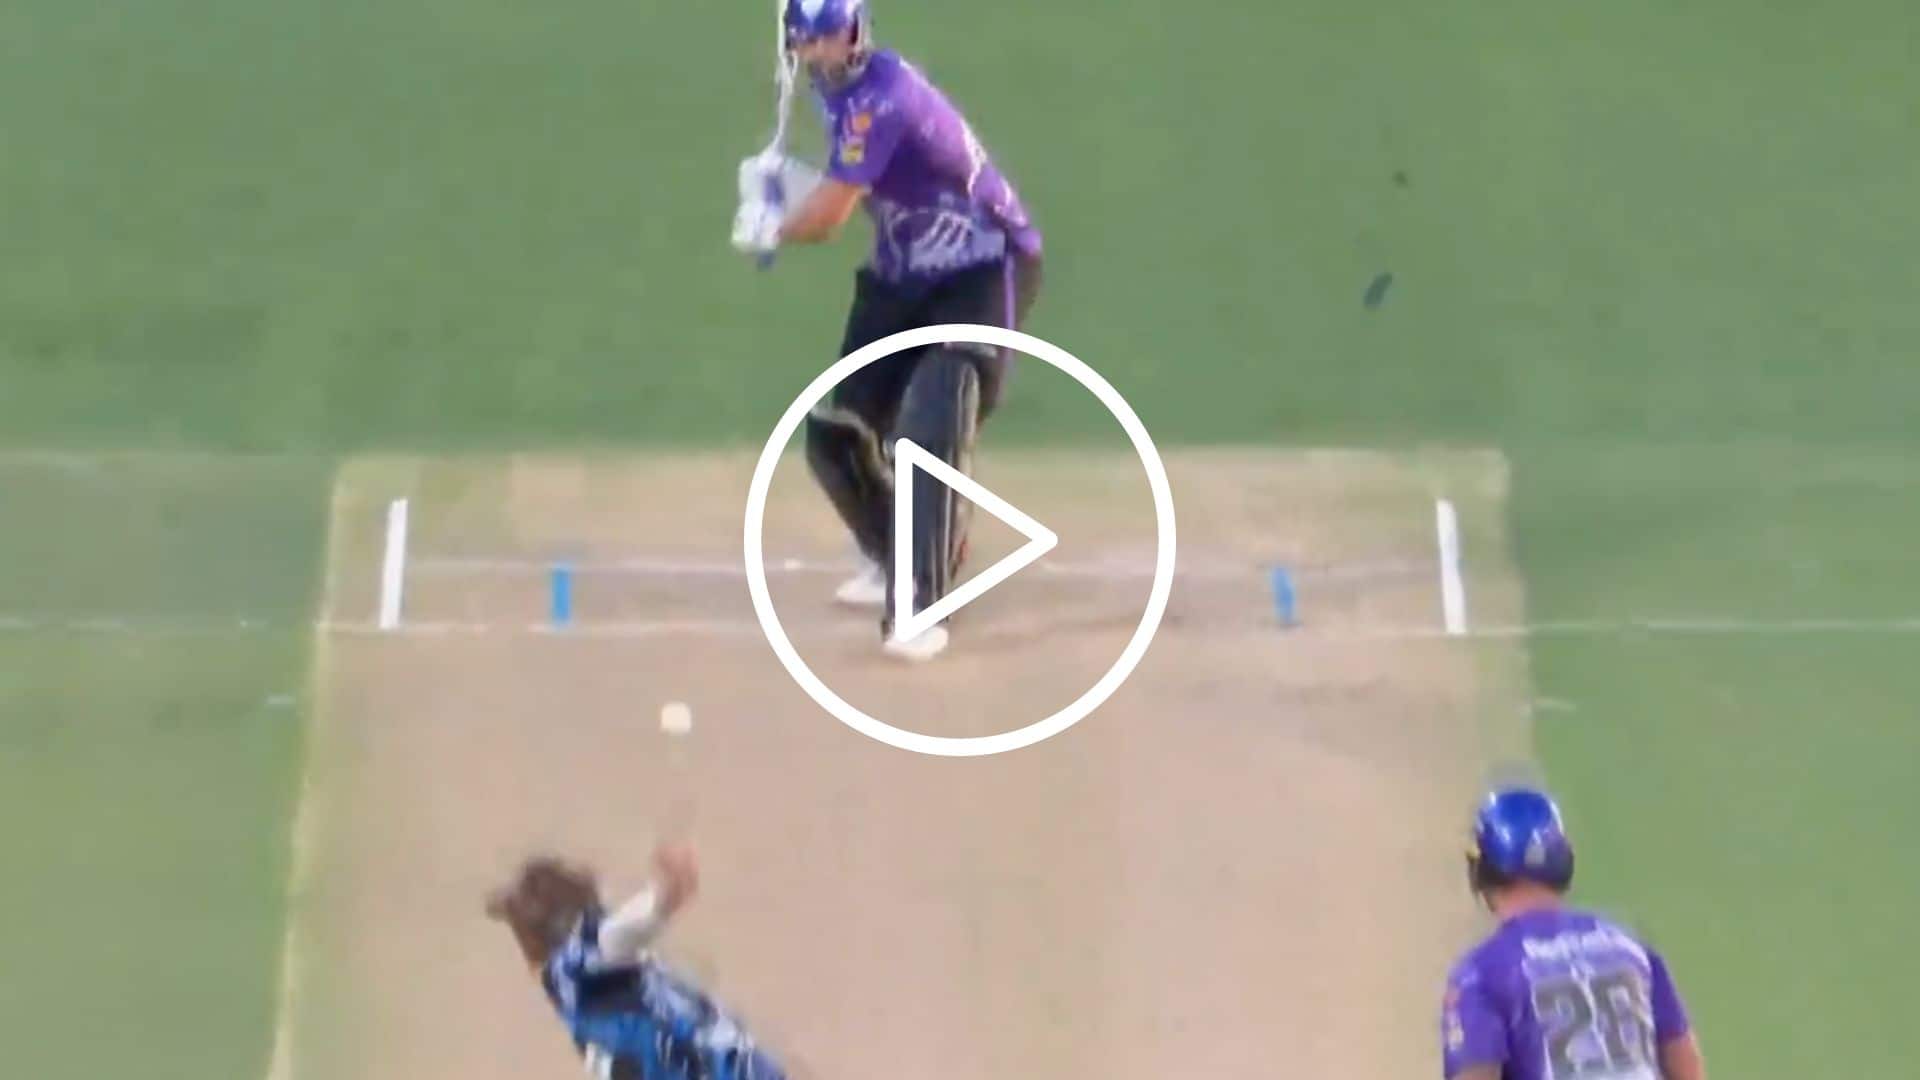 [Watch] MI's Tim David 'Thumps' Monster Six To Leave Fans Awestruck